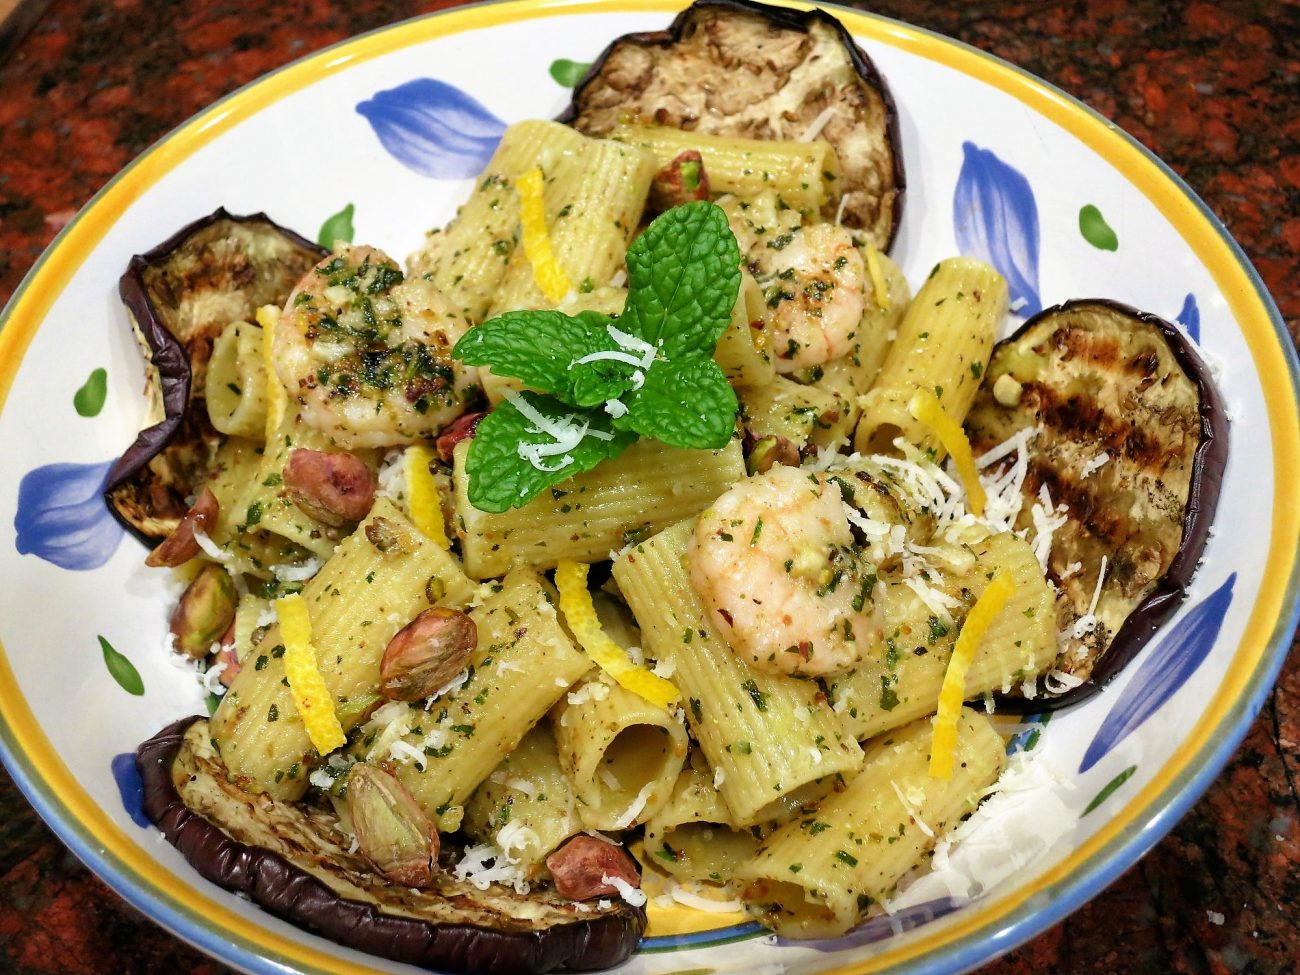 Pasta and mint/pistachio pesto with grilled eggplant and shrimps